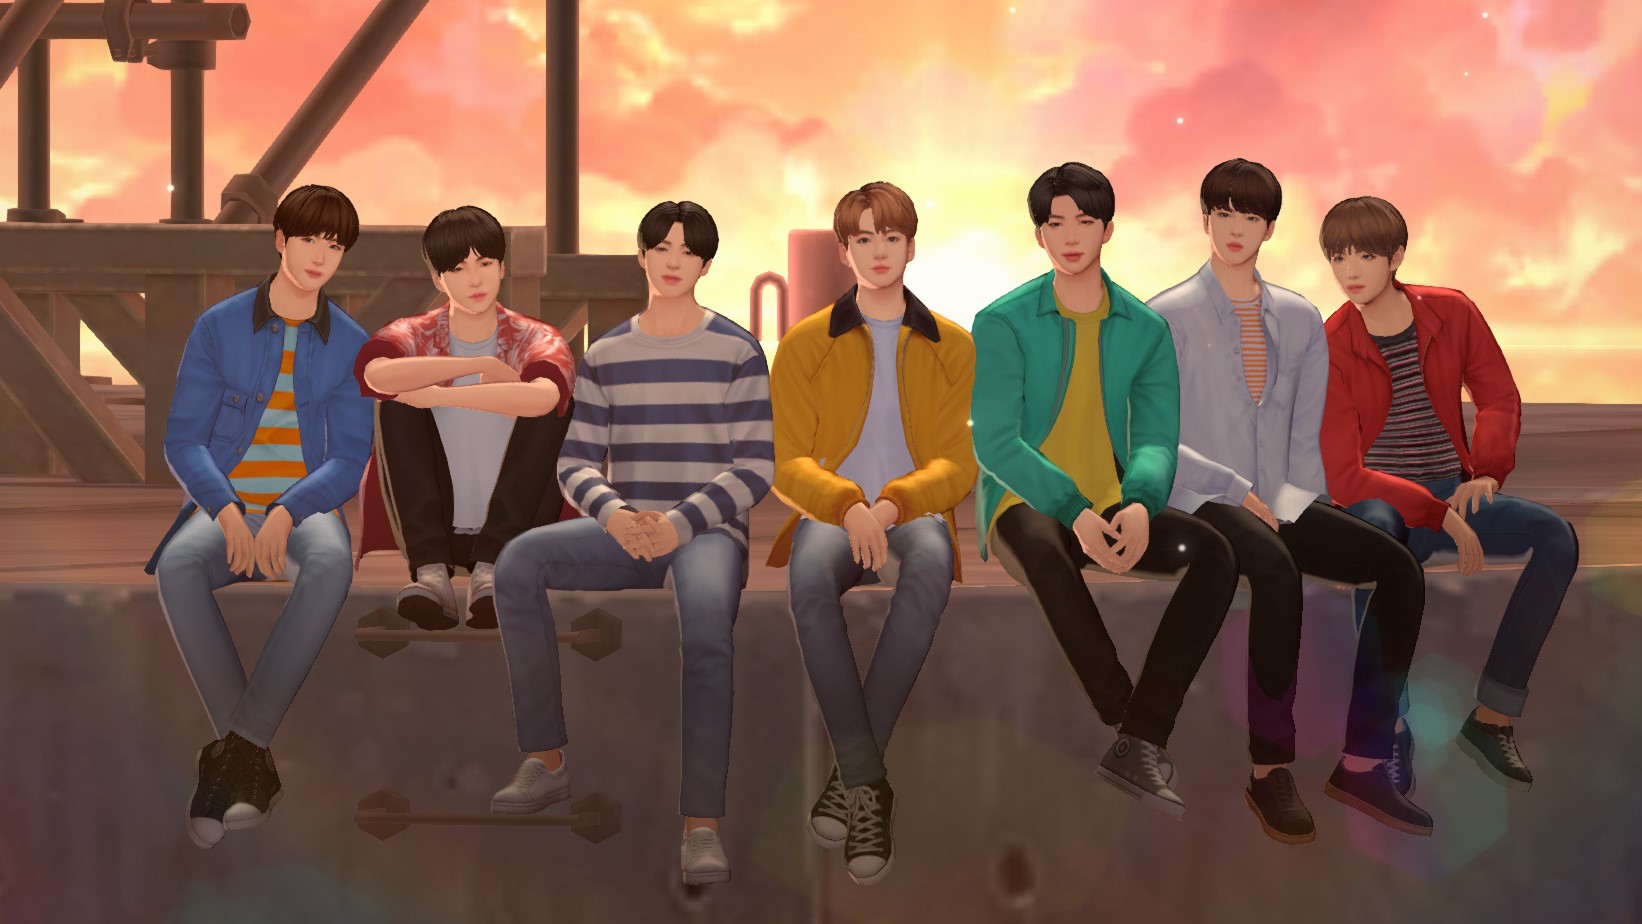 BTS Universe Story Interactive Social Game App Launches Worldwide